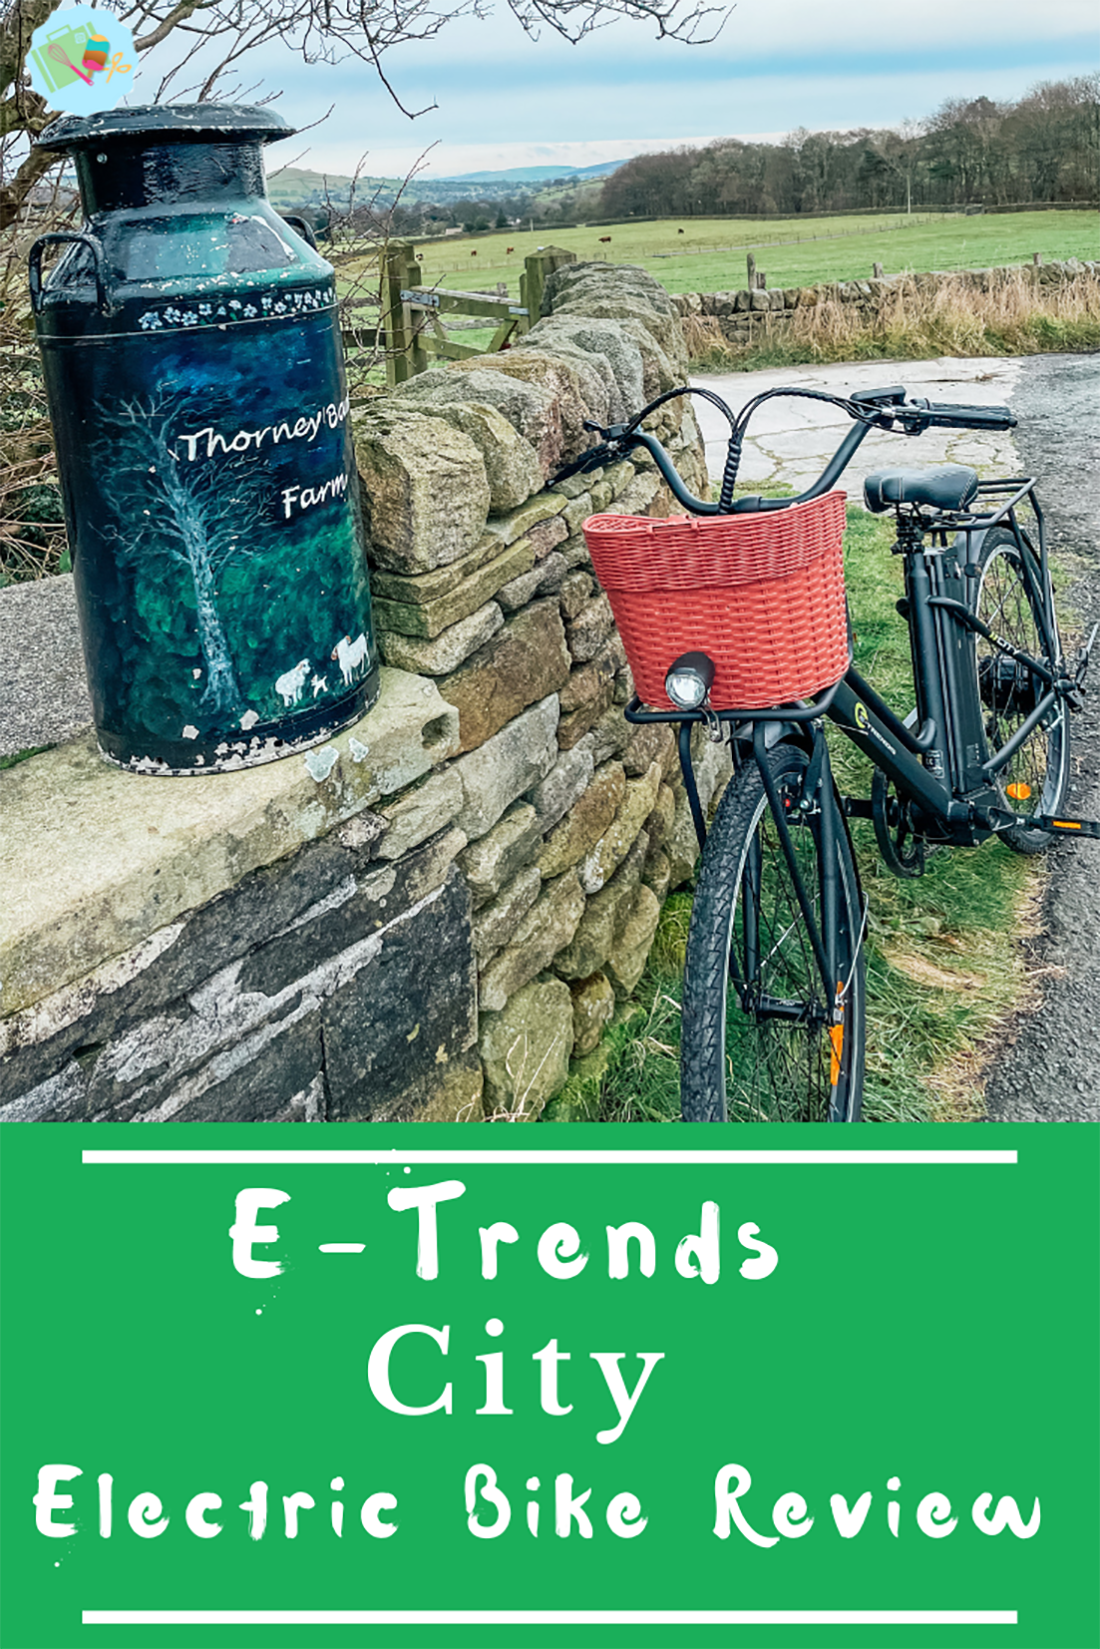 Review of the E-Trends Electric Bike